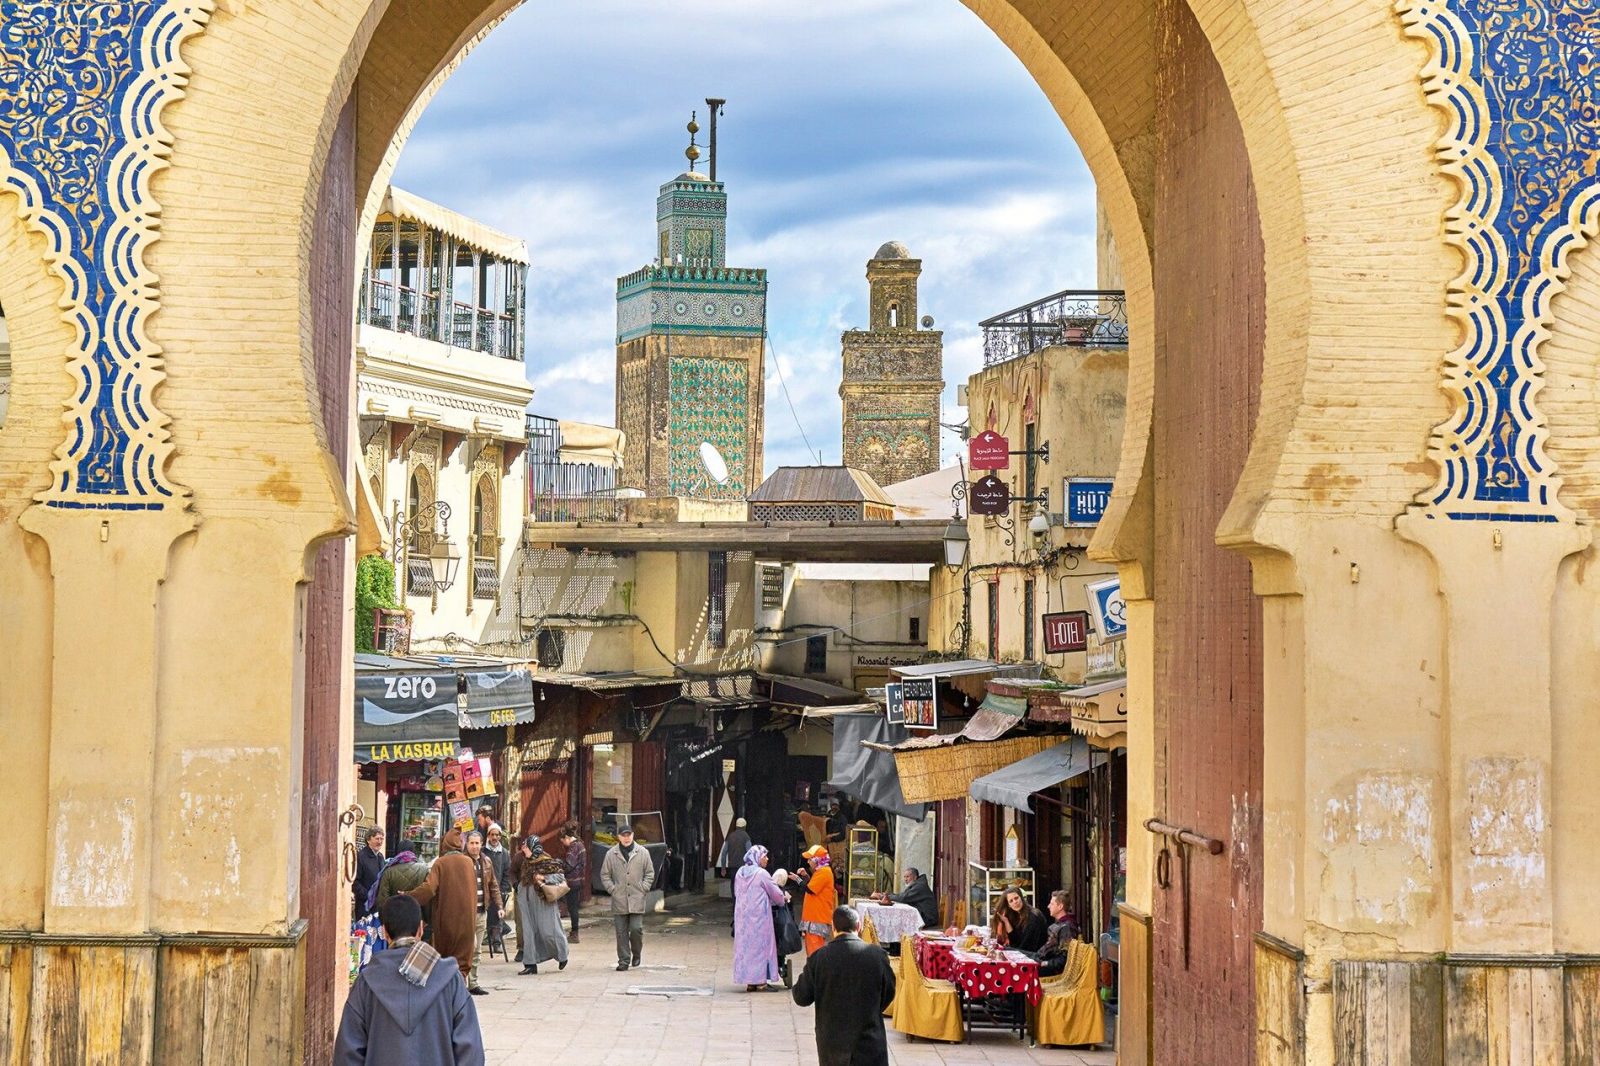 🚢 Journey Around the World in 24 Questions – How Well Can You Score? Fez or Fes, Morocco